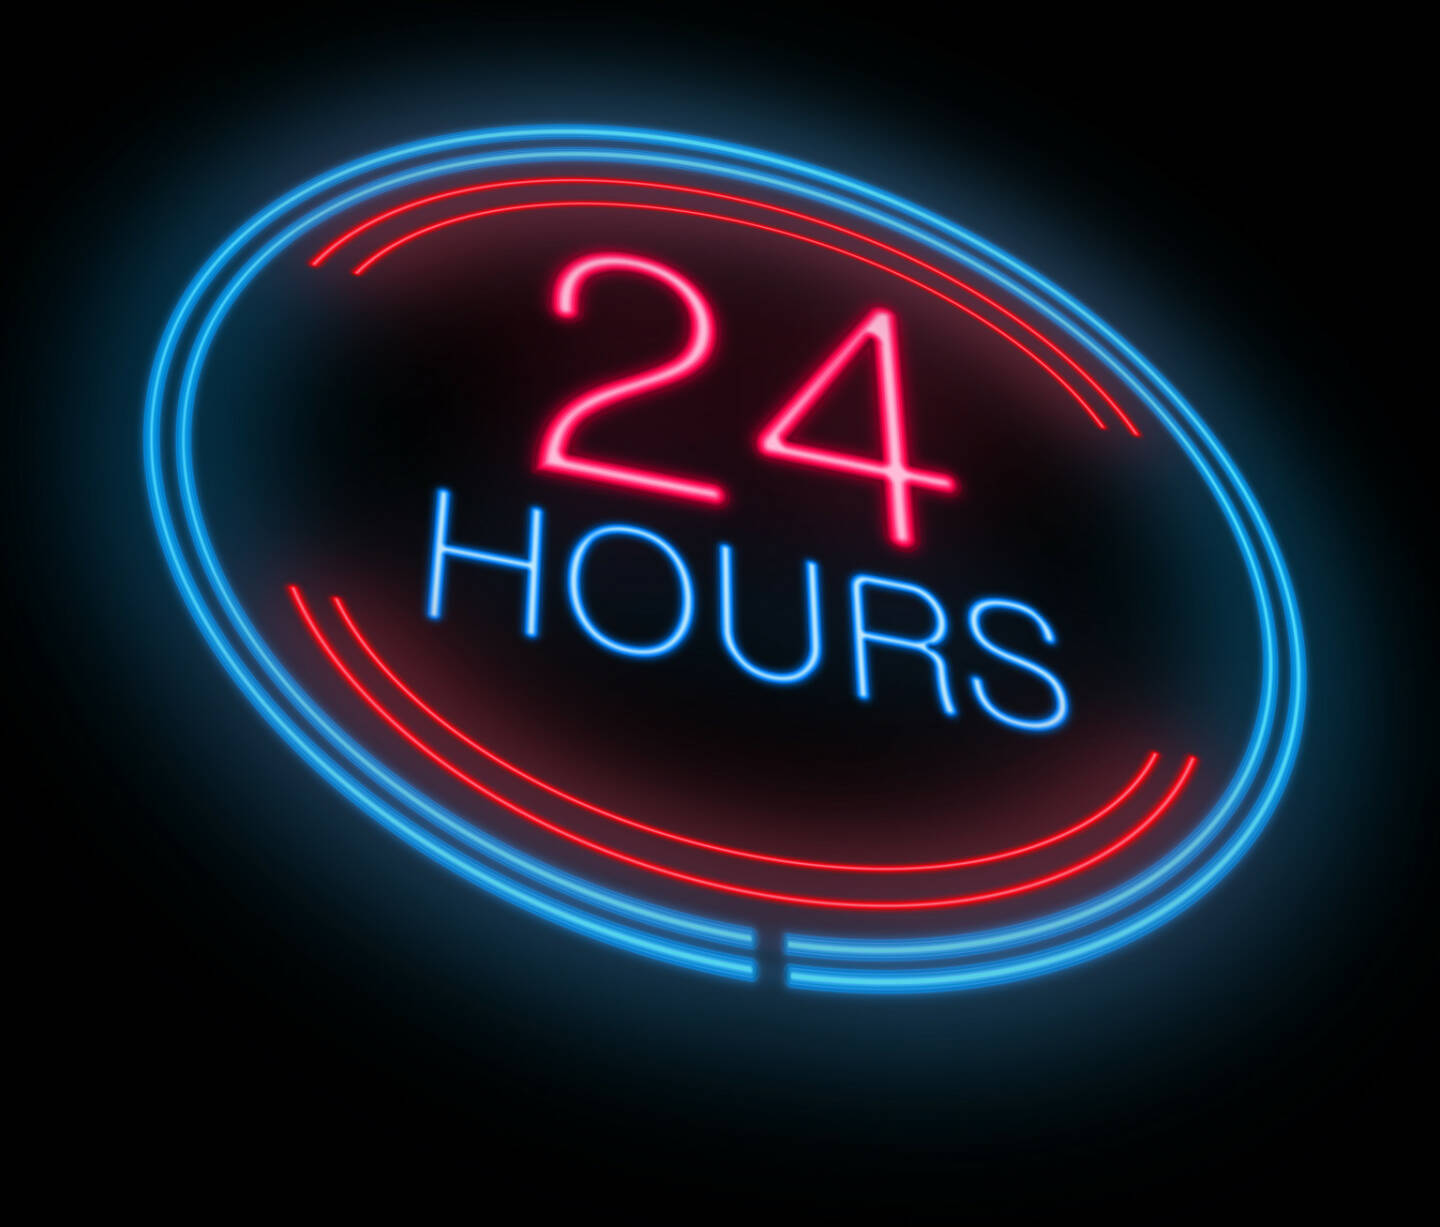 24 Hours, 24 Stunden, 1 Tag http://www.shutterstock.com/de/pic-137874173/stock-photo-illustration-depicting-an-illuminated-neon-hours-sign.html